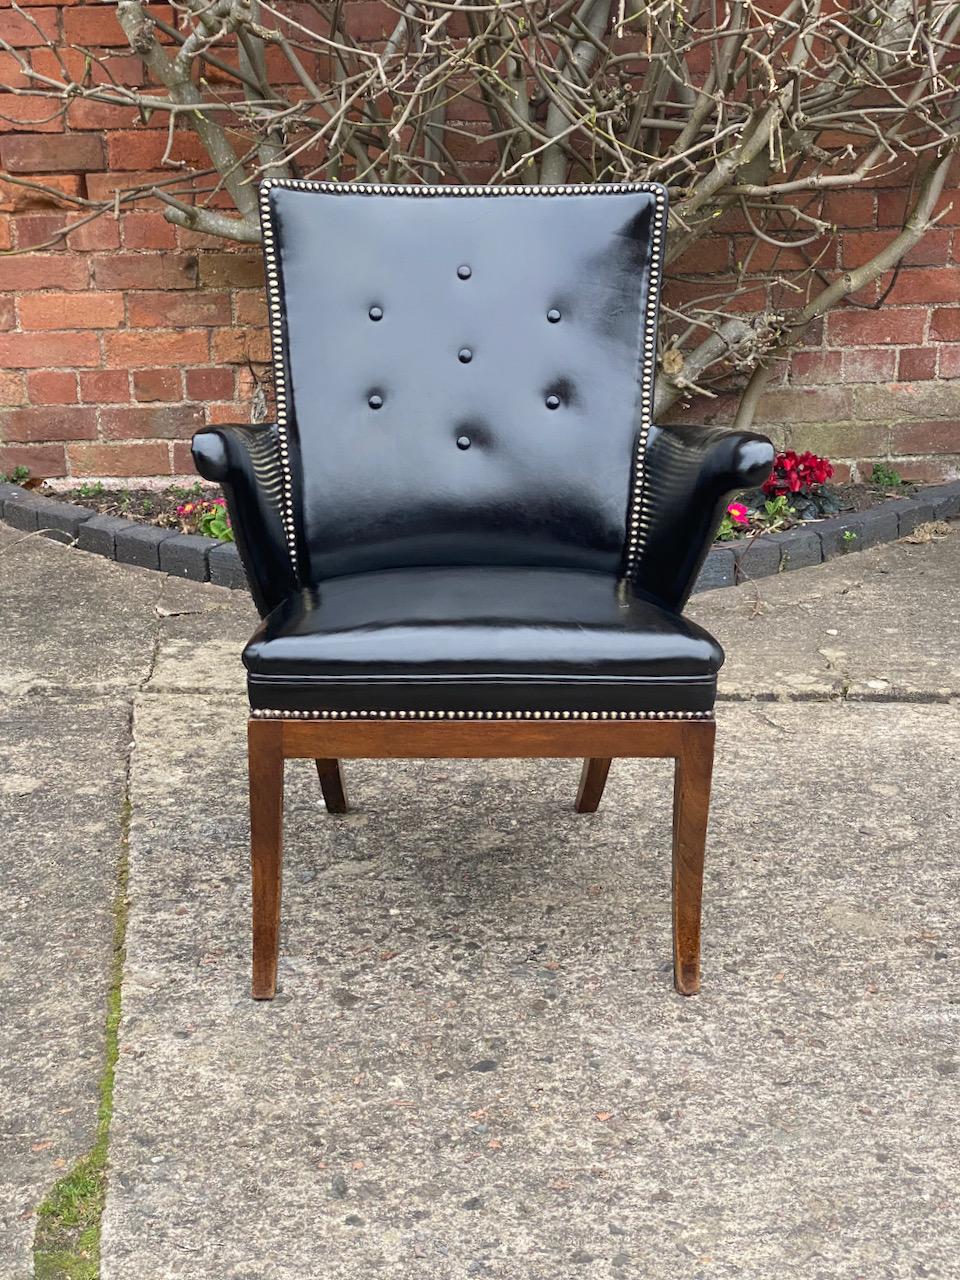 Frits Henningsen armchair Denmark Circa 1932

Magnificent mid century Frits Henningsen Leather & Mahogany Armchair Denmark circa 1932, the buttoned back chair with two gull like arm supports is finished in the finest black leather with brass stud